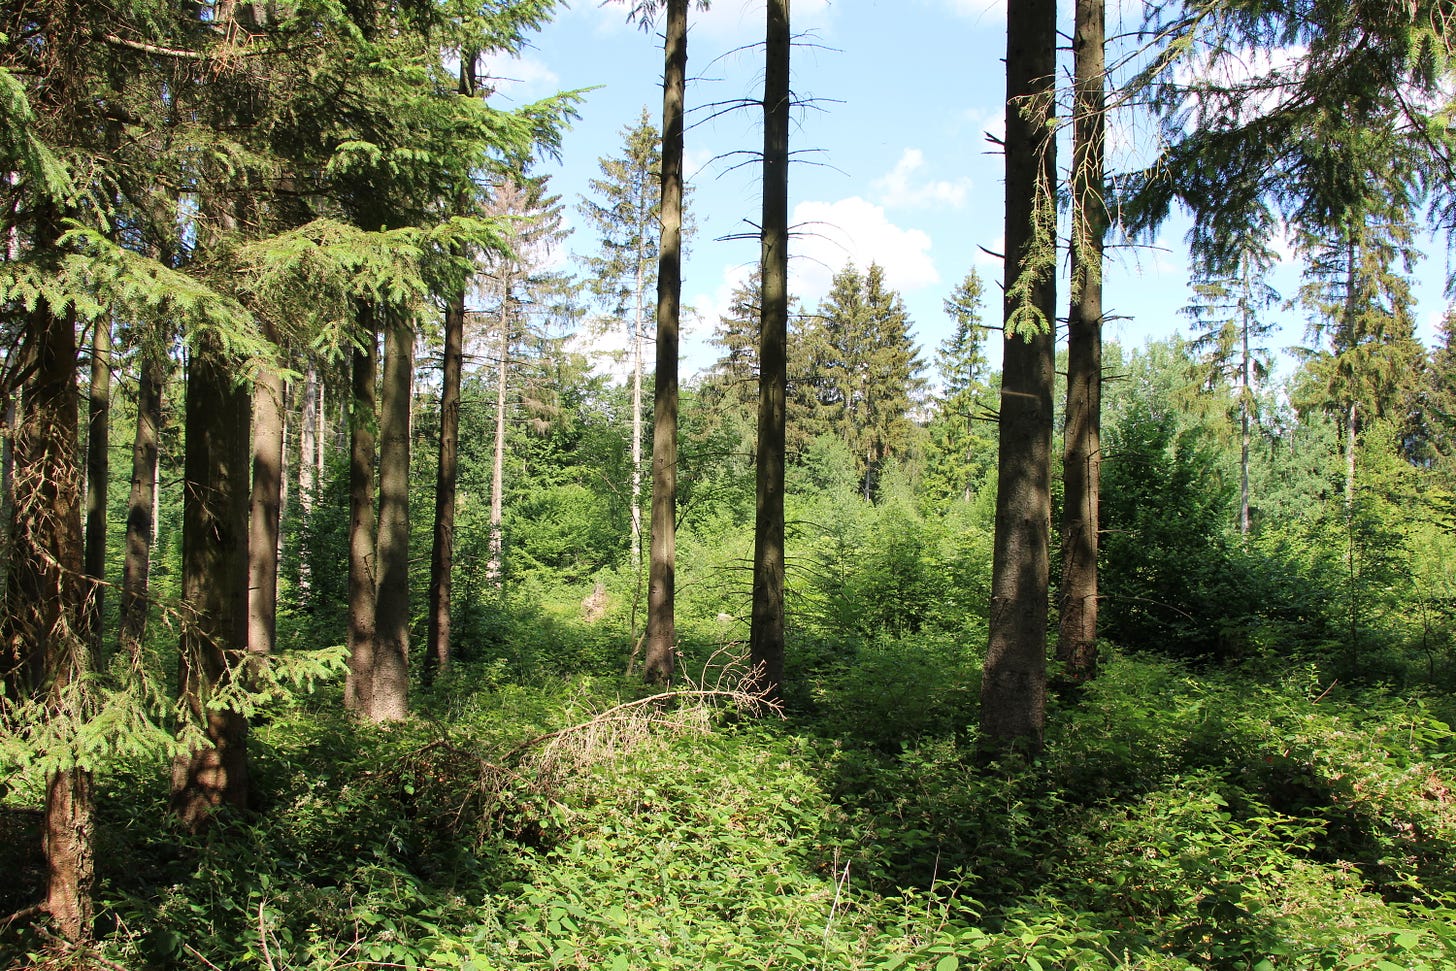 a temperate coniferous forest with a few successional stages clearly visible